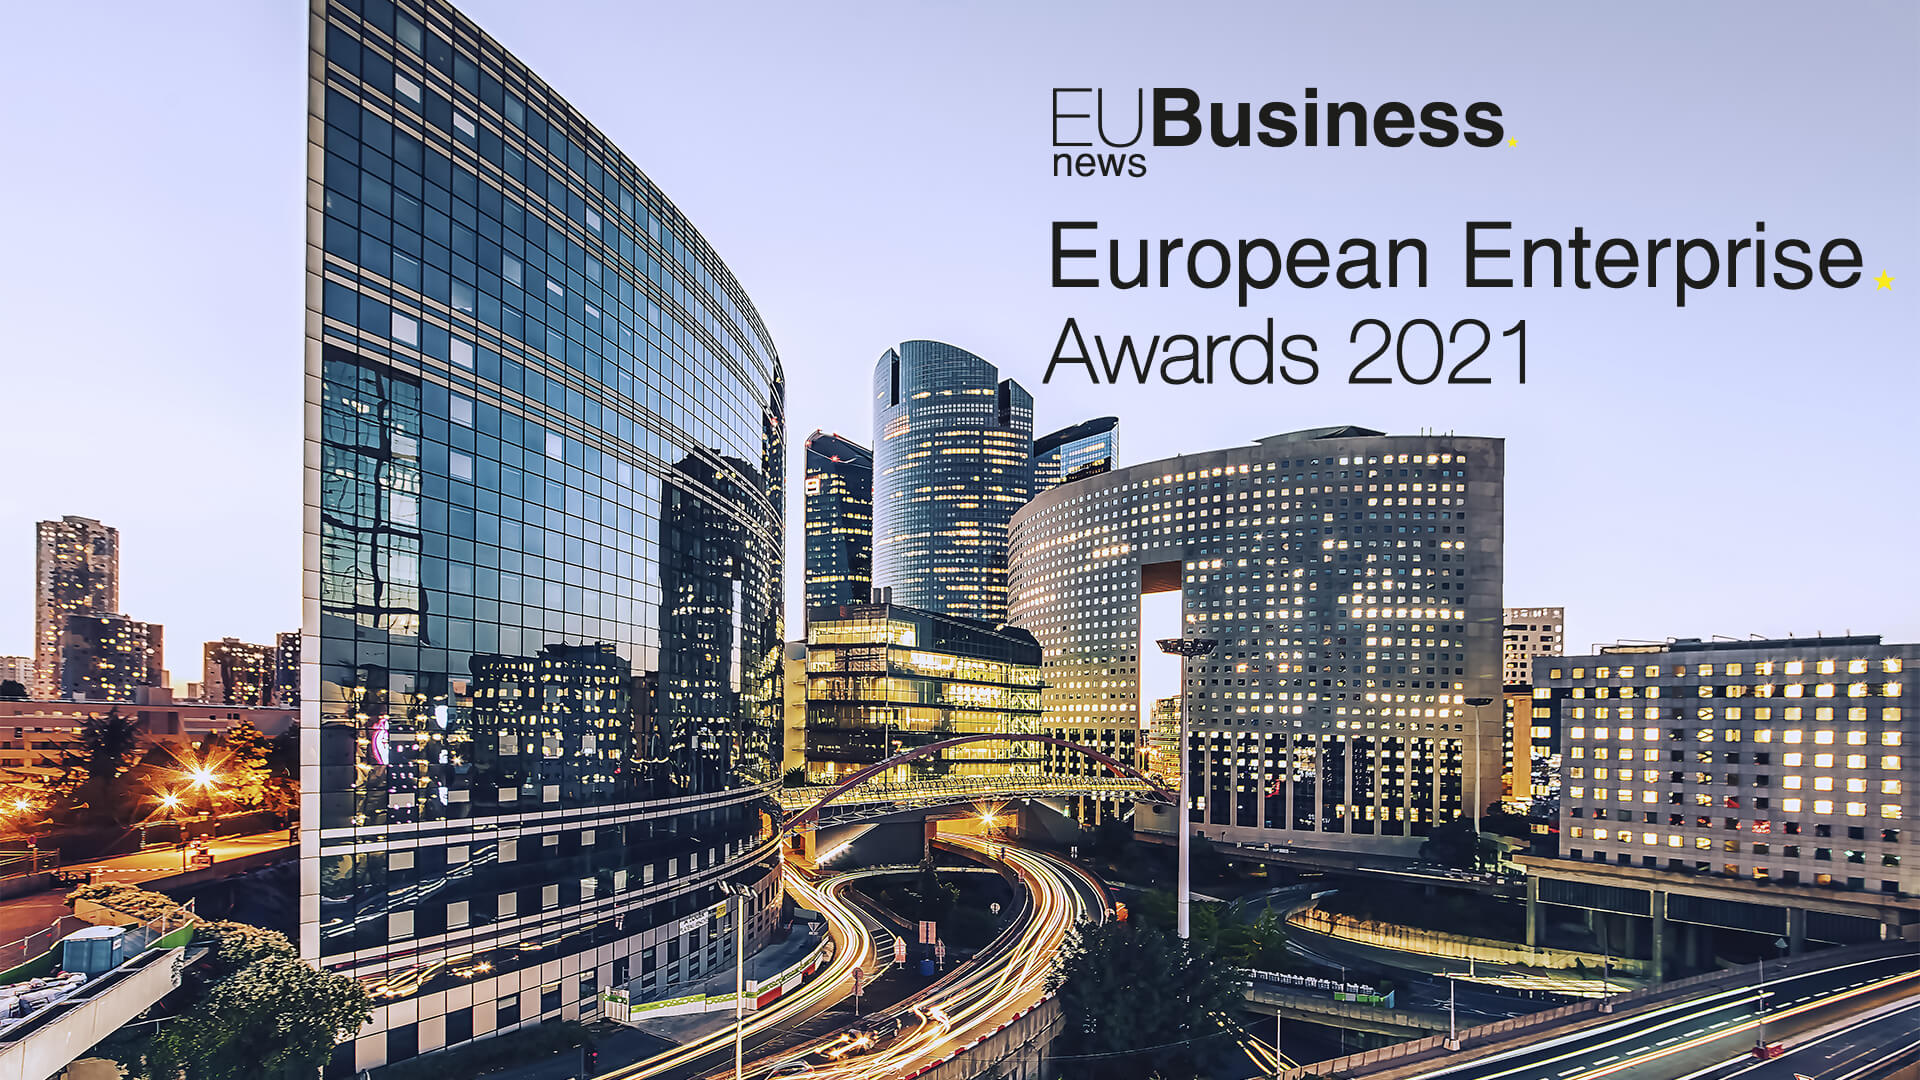 EU Business News European Enterprise Awards 2021 logo with the finance district of Paris in the background